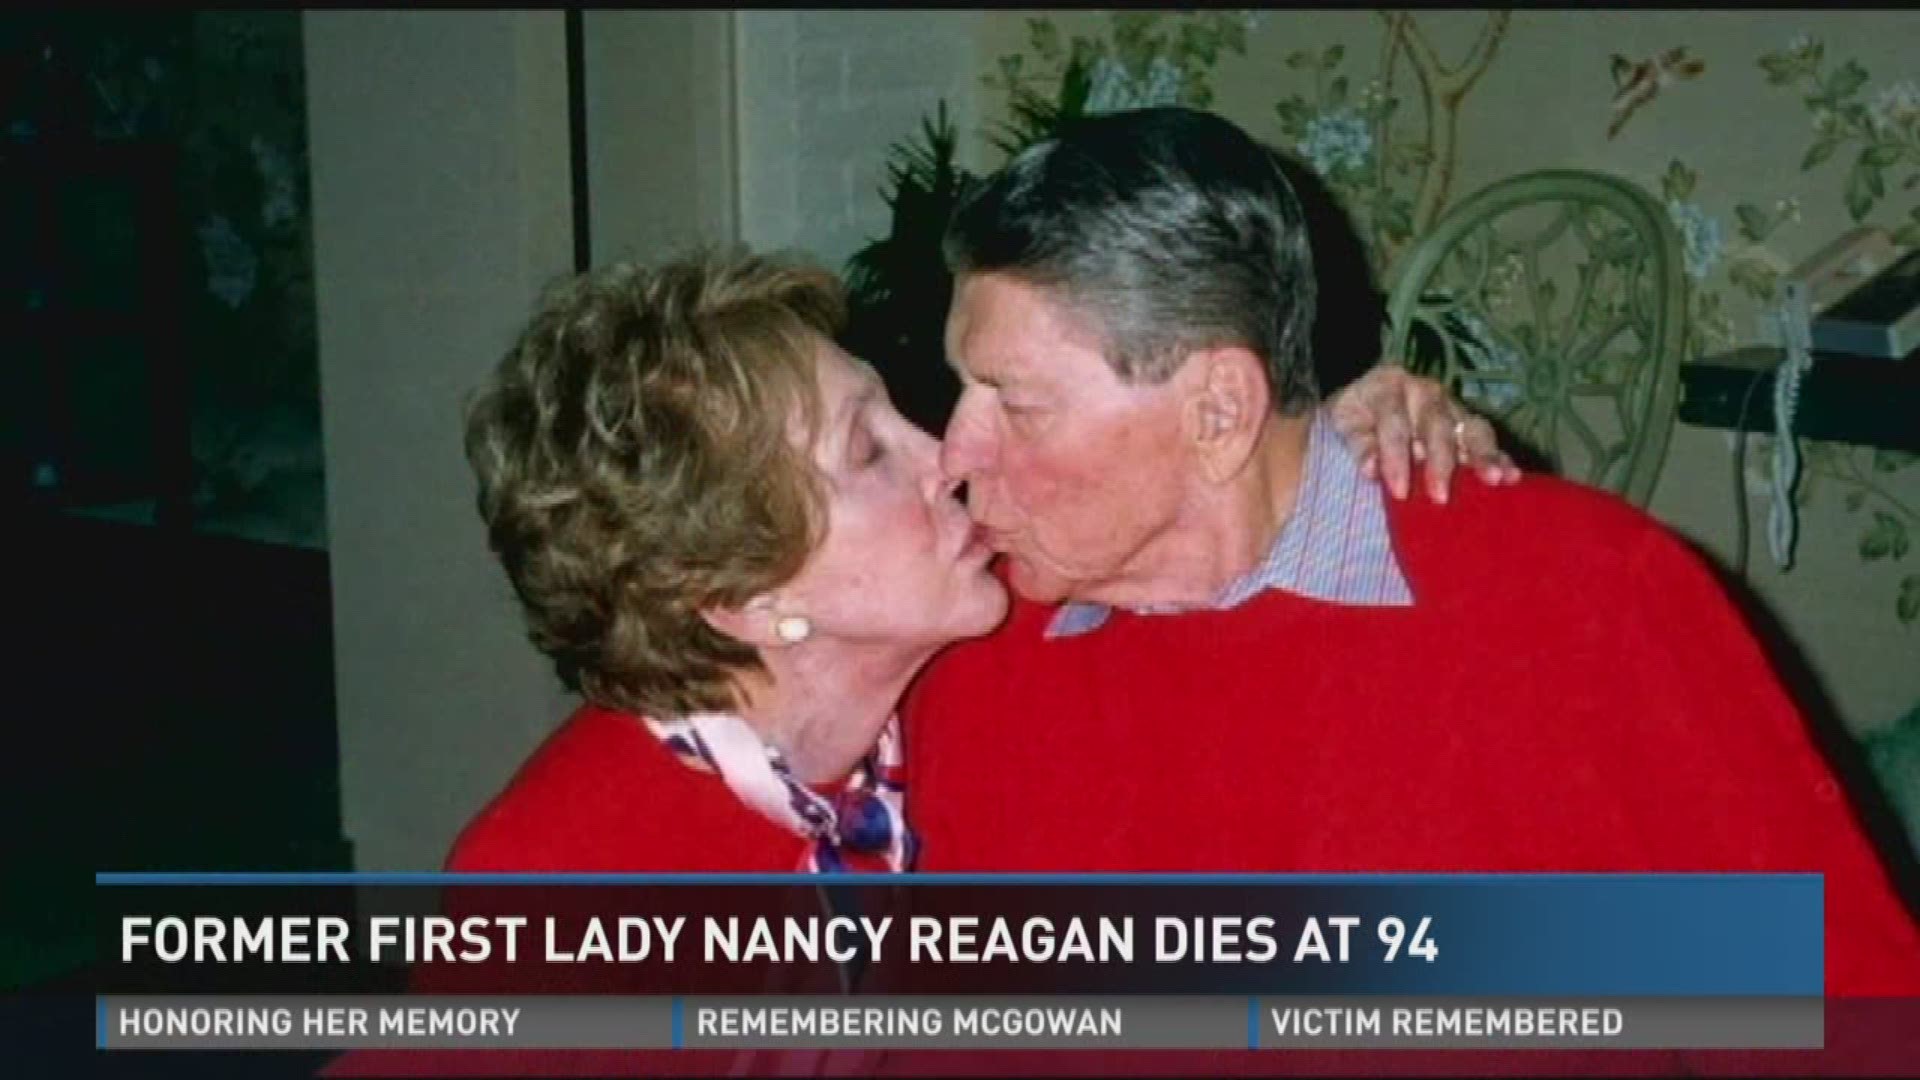 Nation mourns loss of former first lady Nancy Reagan